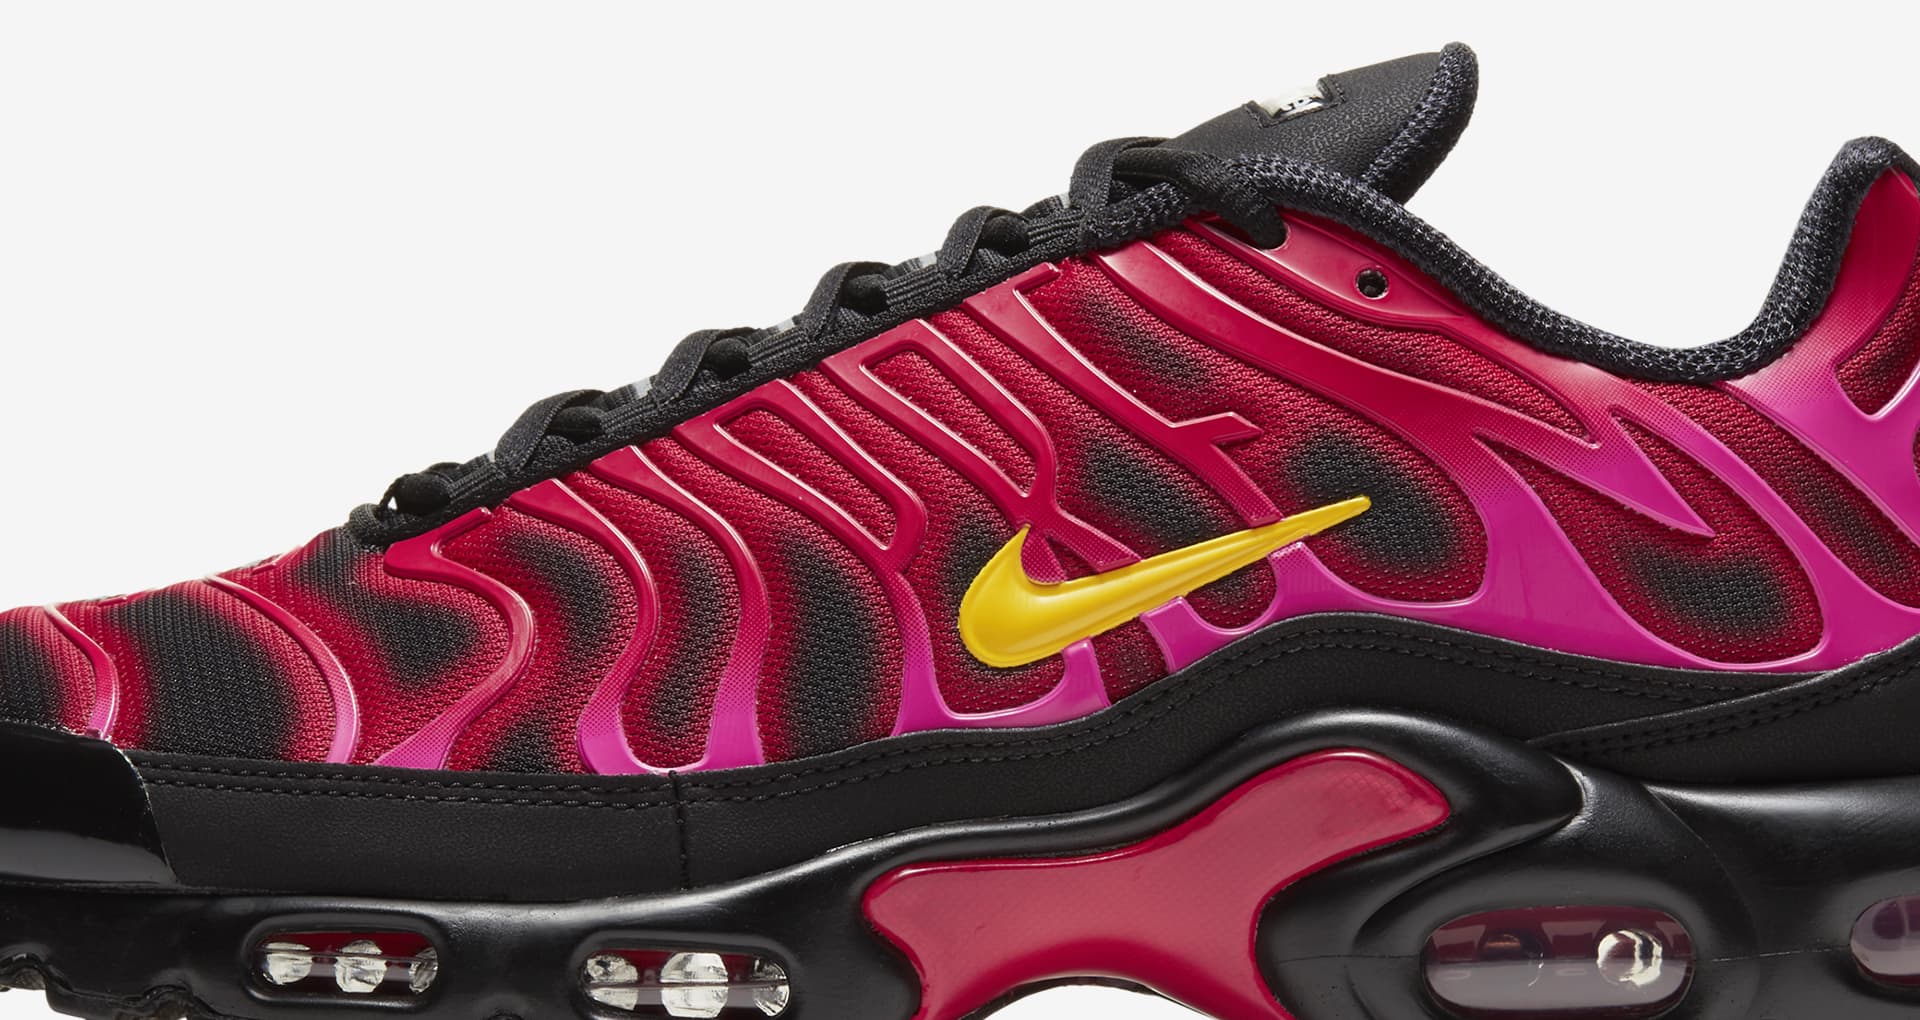 Air Max Plus x Supreme 'Fire Pink' Release Date. Nike SNKRS ZA